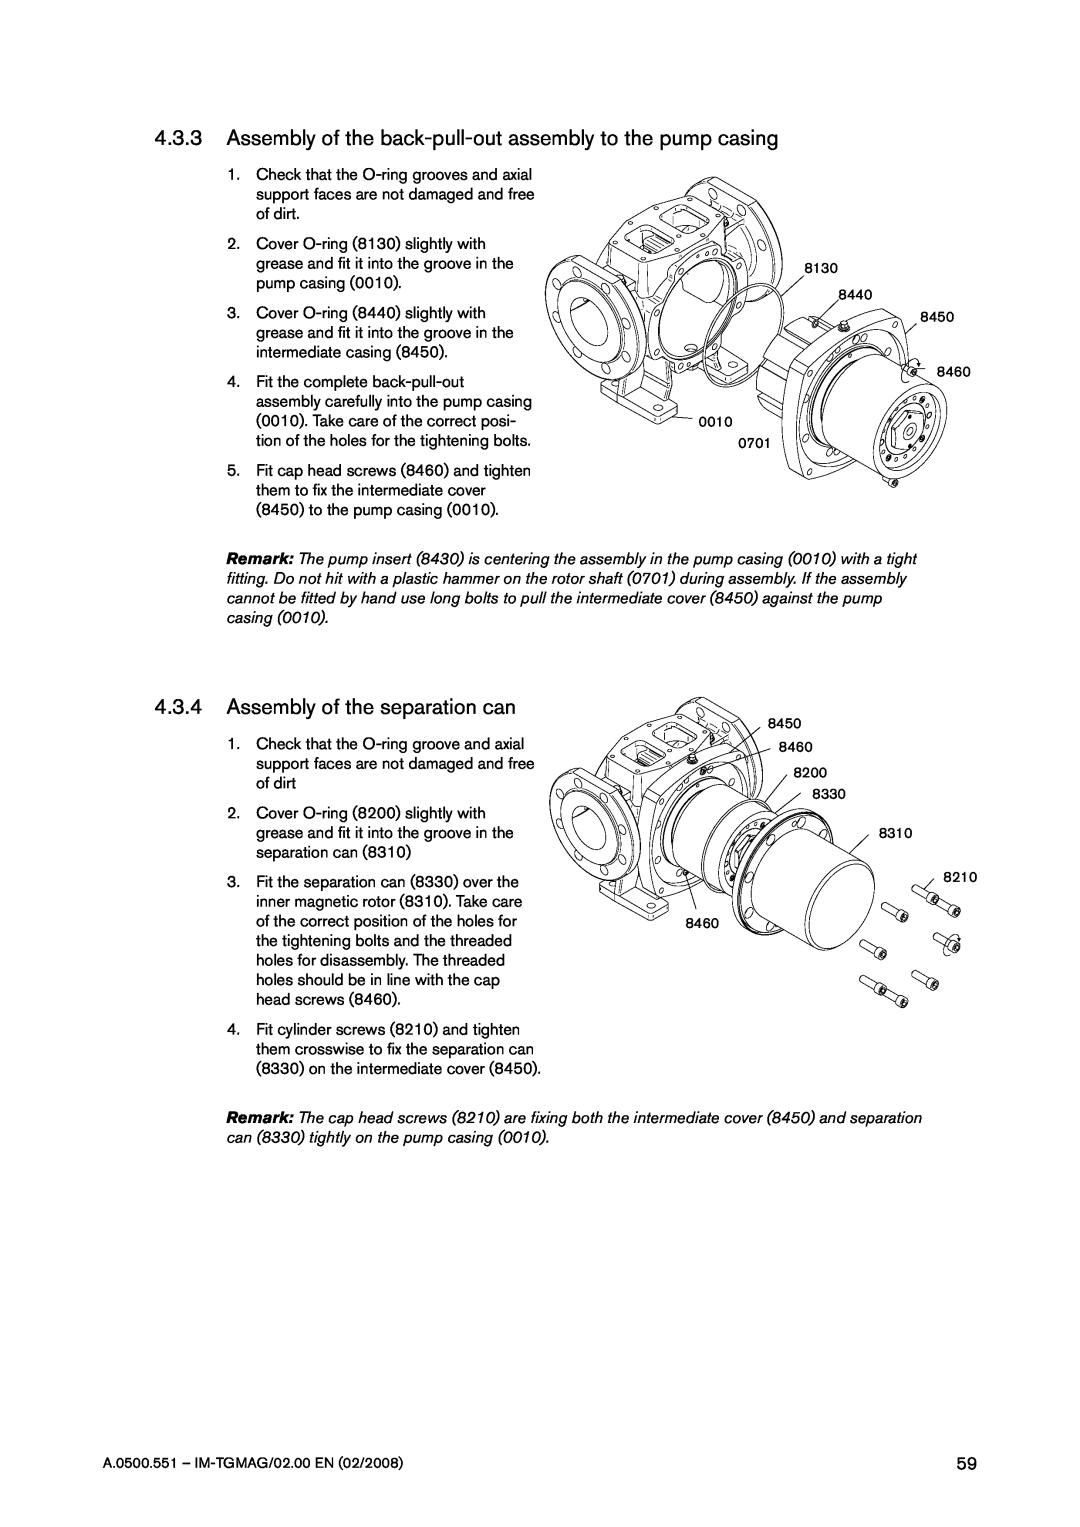 SPX Cooling Technologies TG MAG86-100 4.3.4Assembly of the separation can, 0010, 8130, 8450 8460 8200 8330 8310 